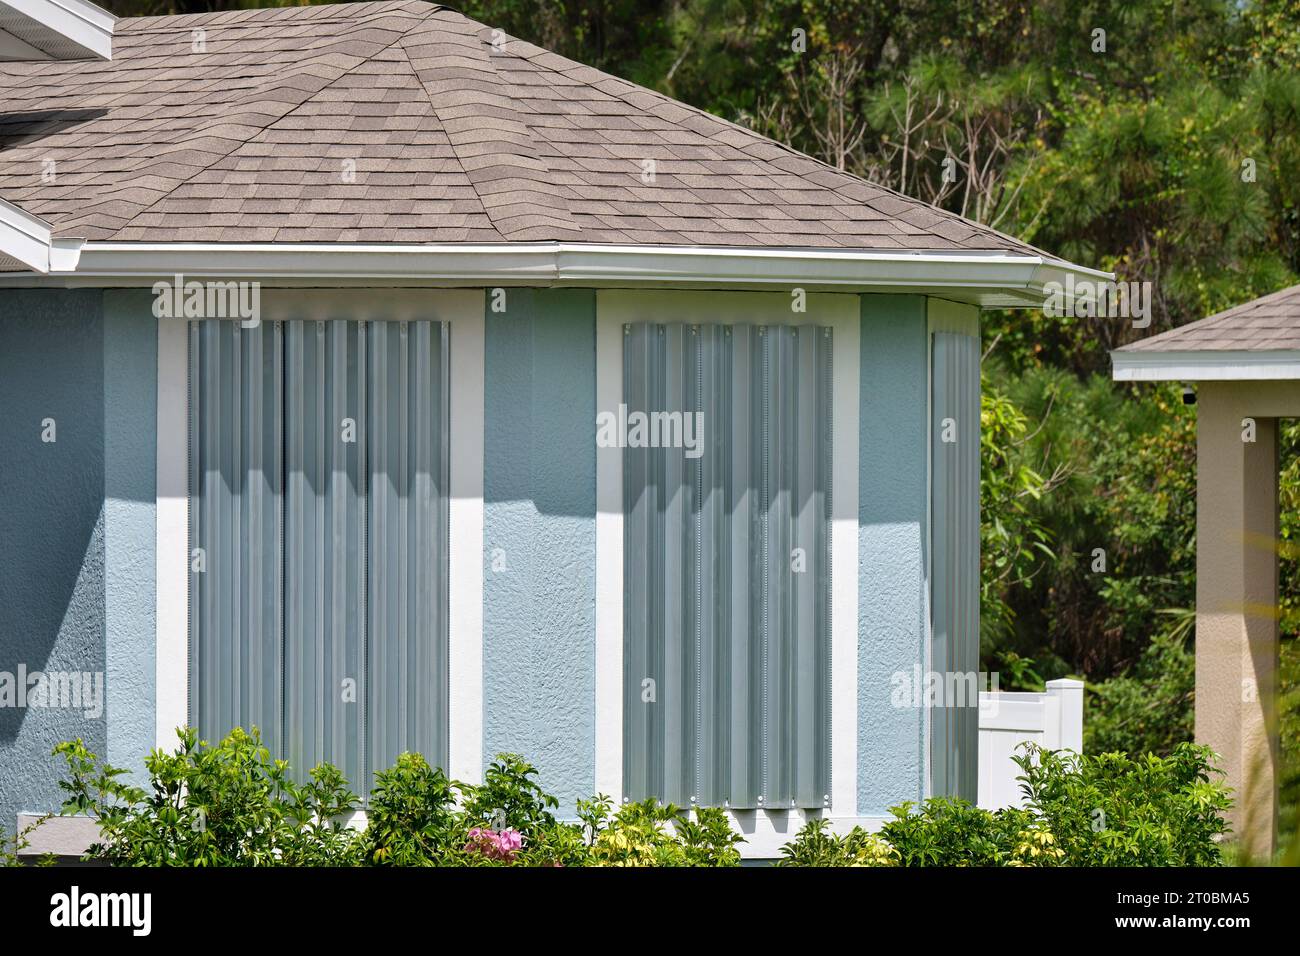 Steel storm shutters for hurricane protection of house windows. Protective measures before natural disaster in Florida. Stock Photo